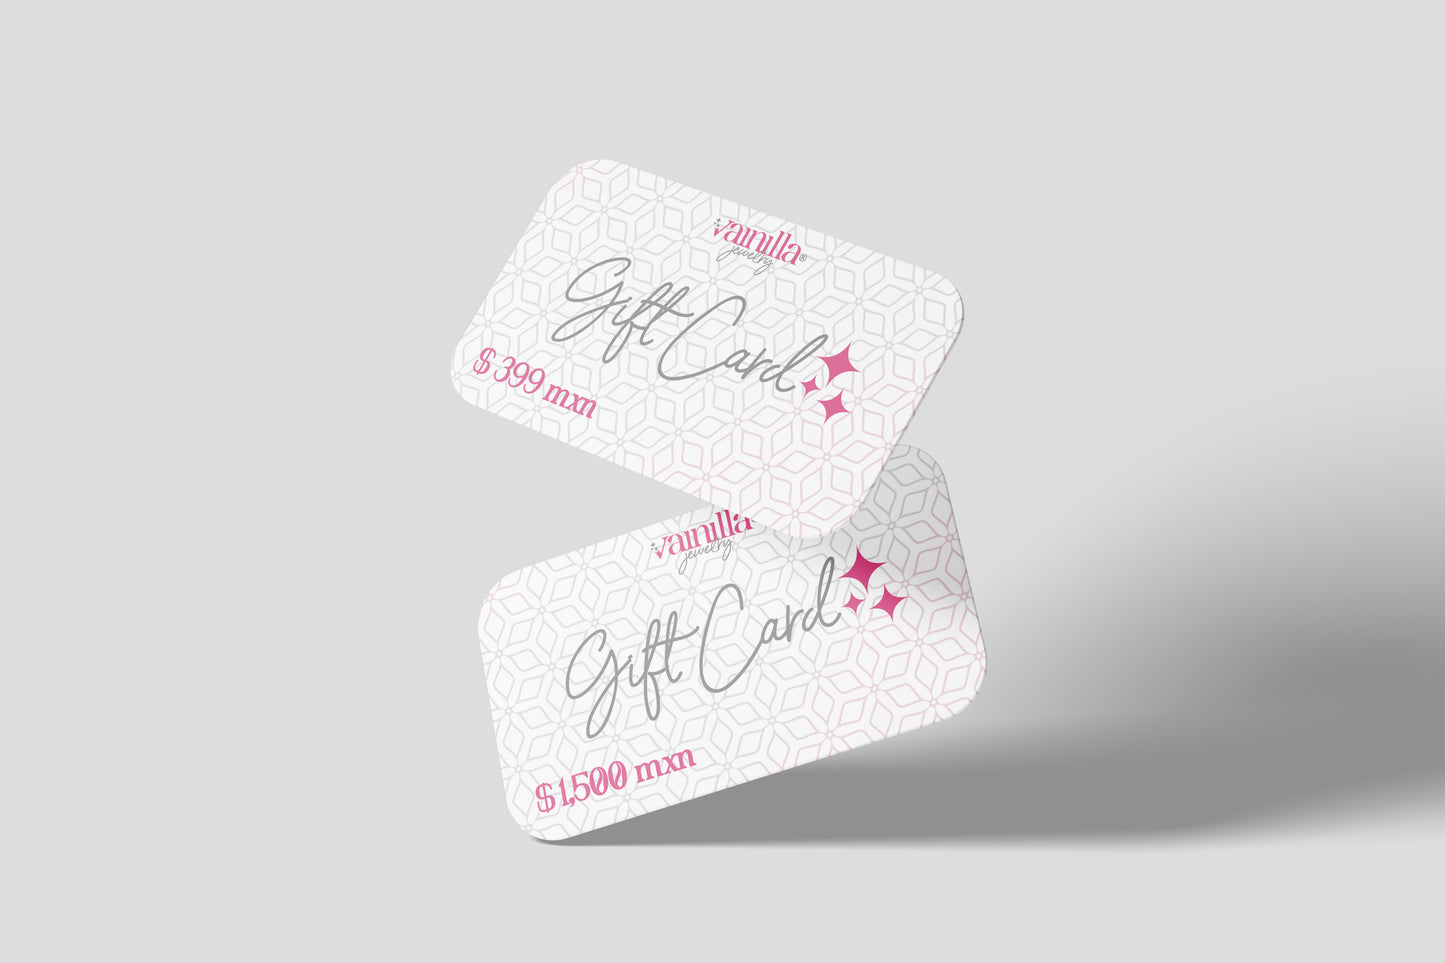 Gift Cards ★